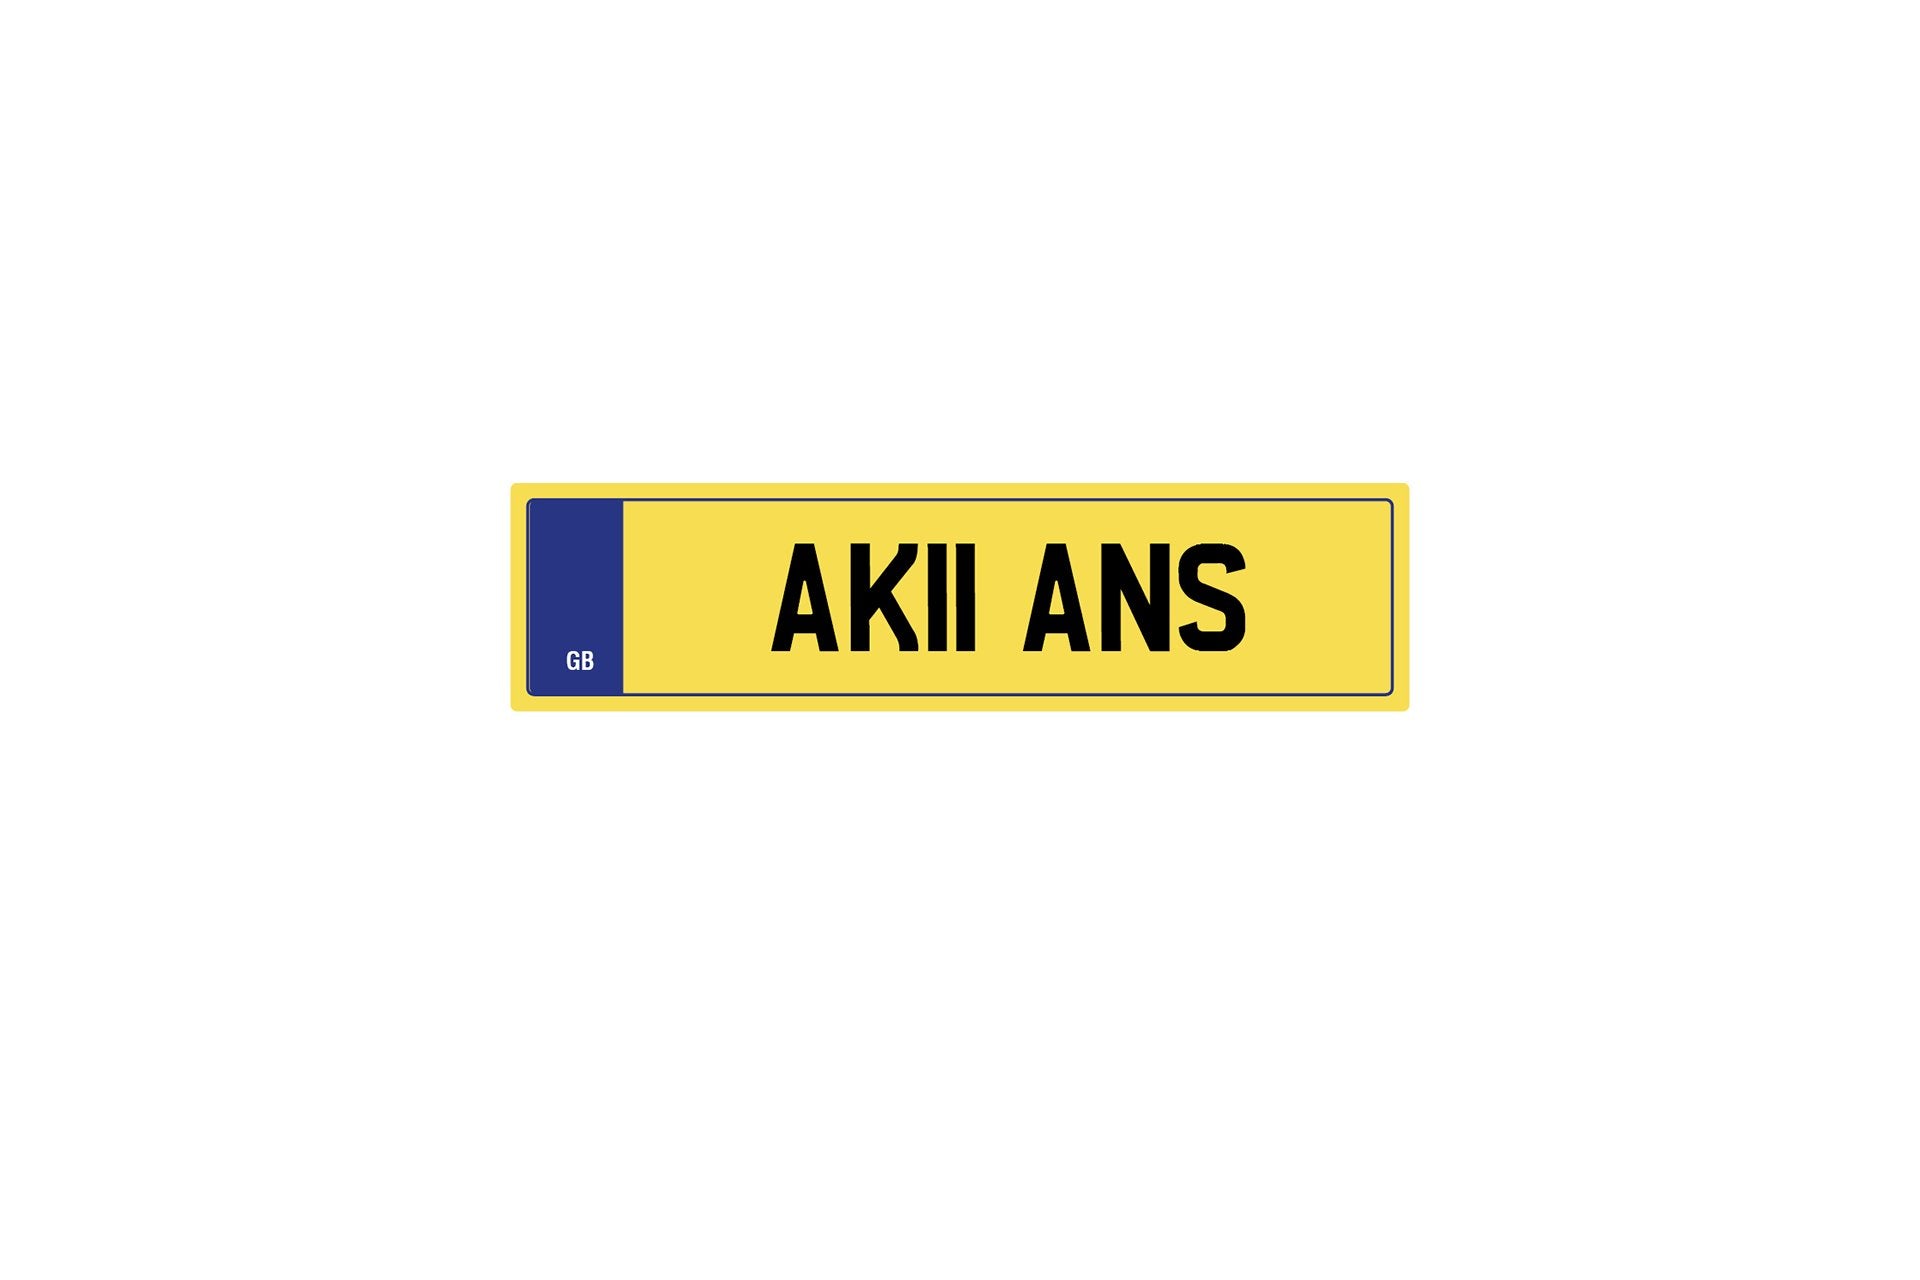 Private Plate Ak11 Ans by Kahn - Image 173